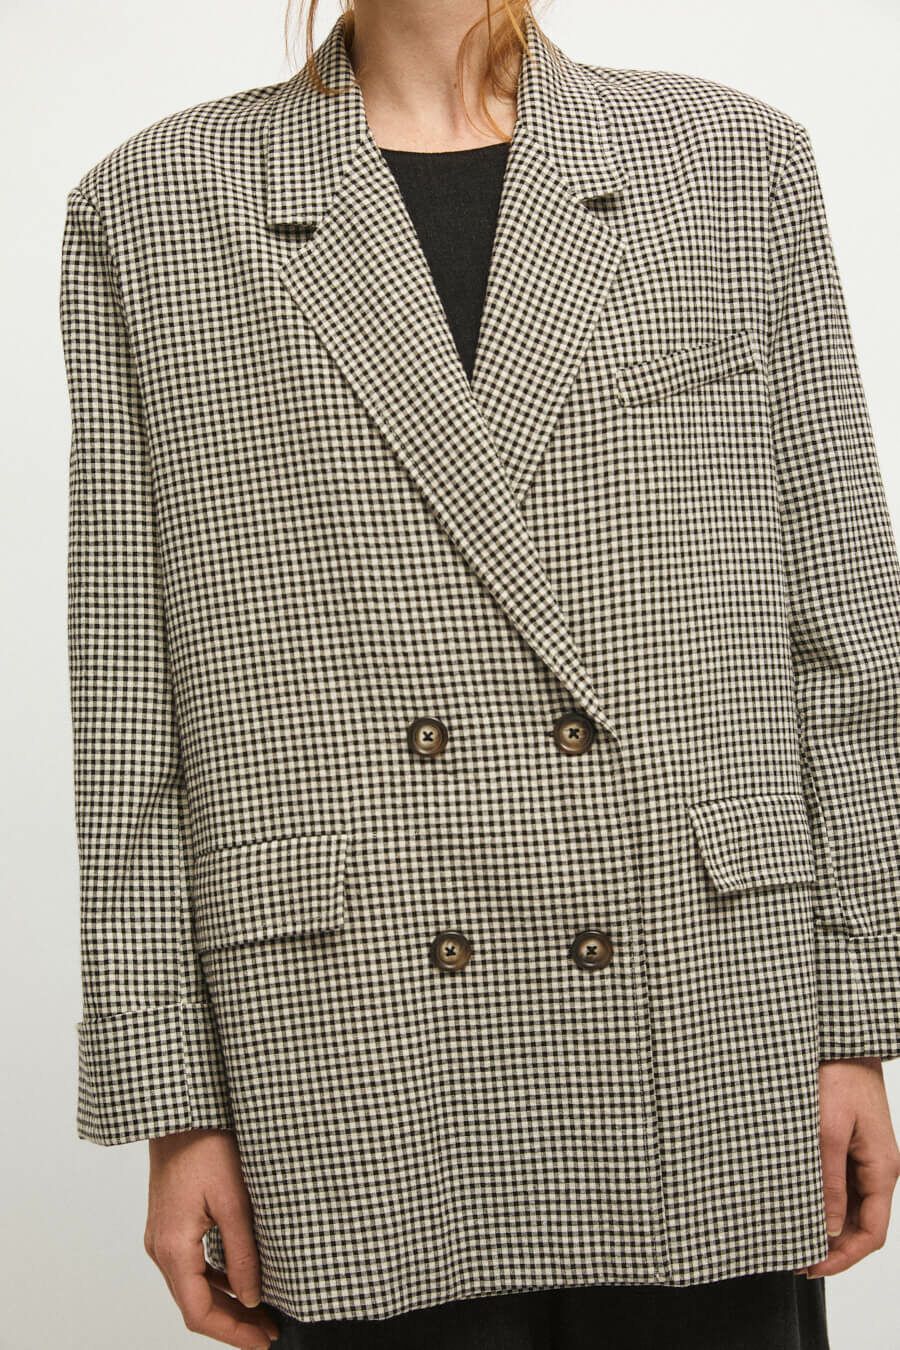 Product Image for Quionia Blazer, Black Gingham